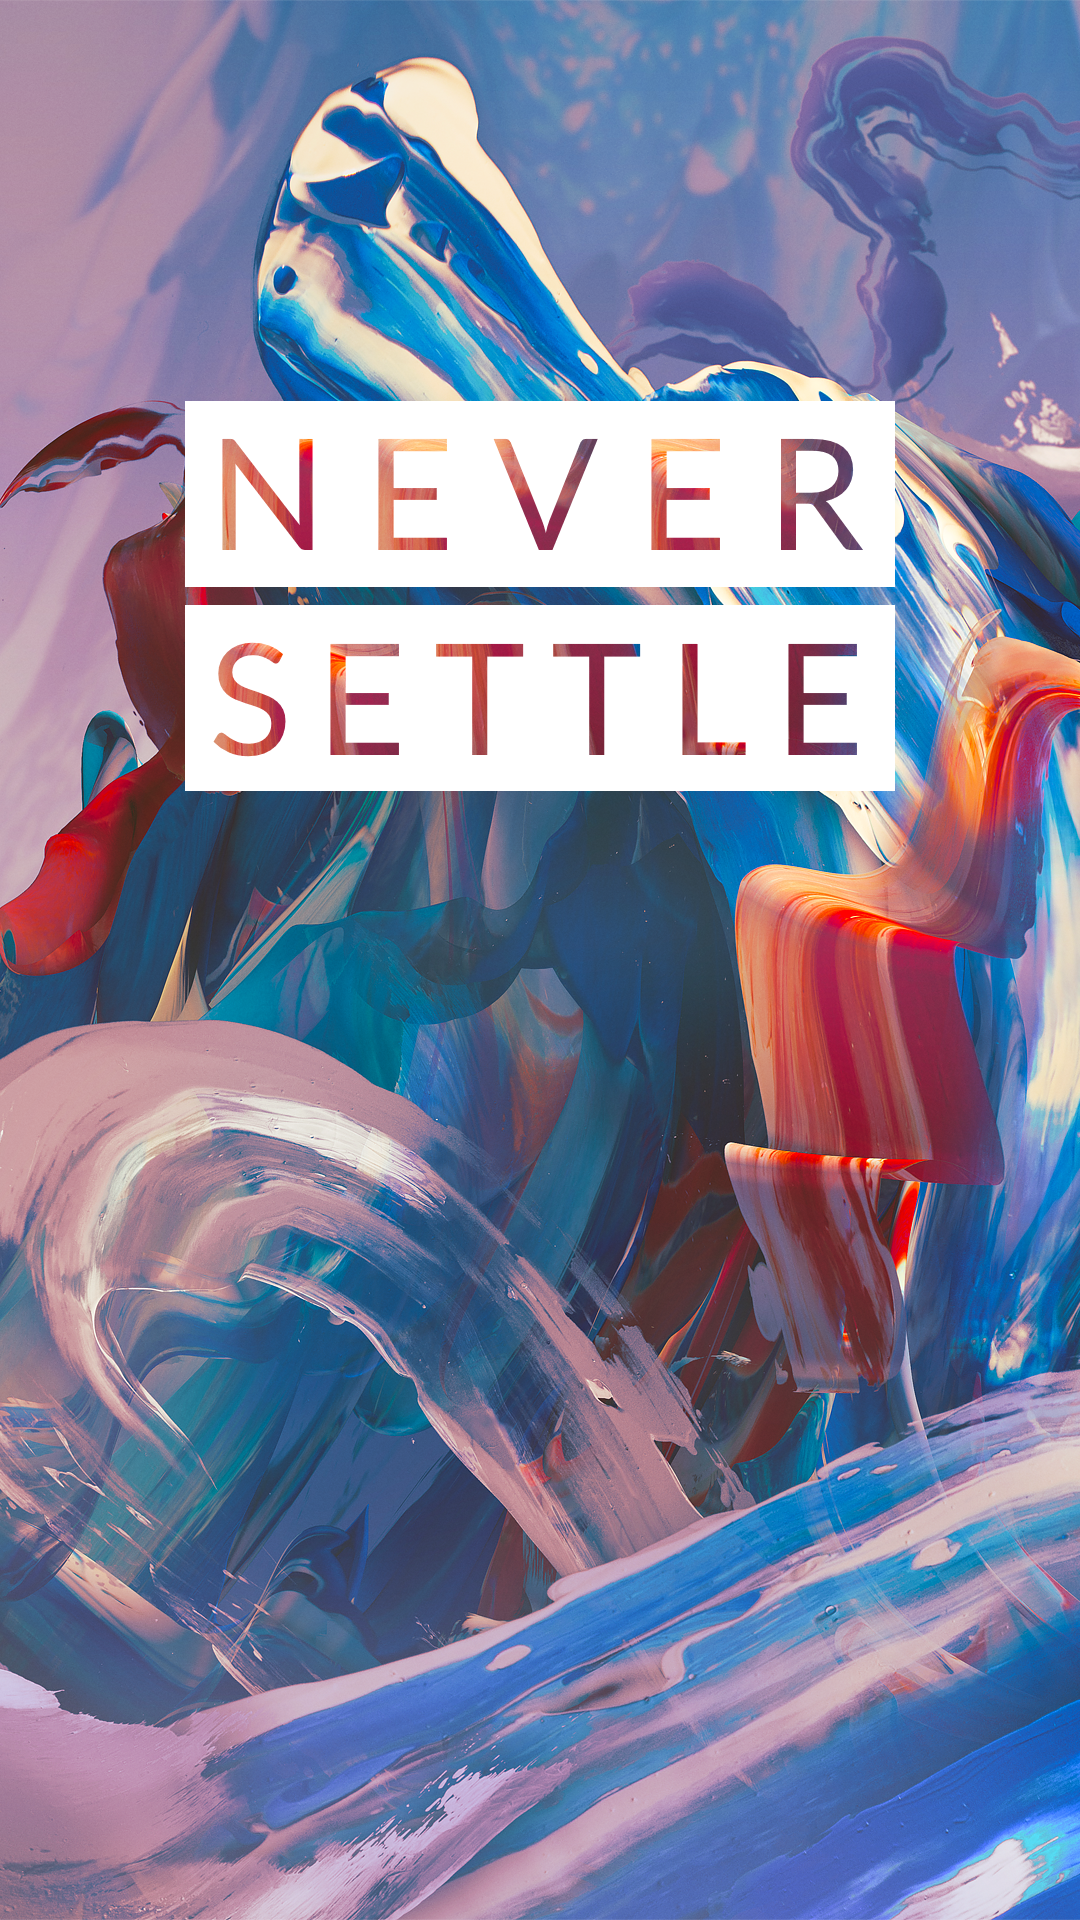 wallpaper for oneplus 3t,water,font,poster,games,illustration